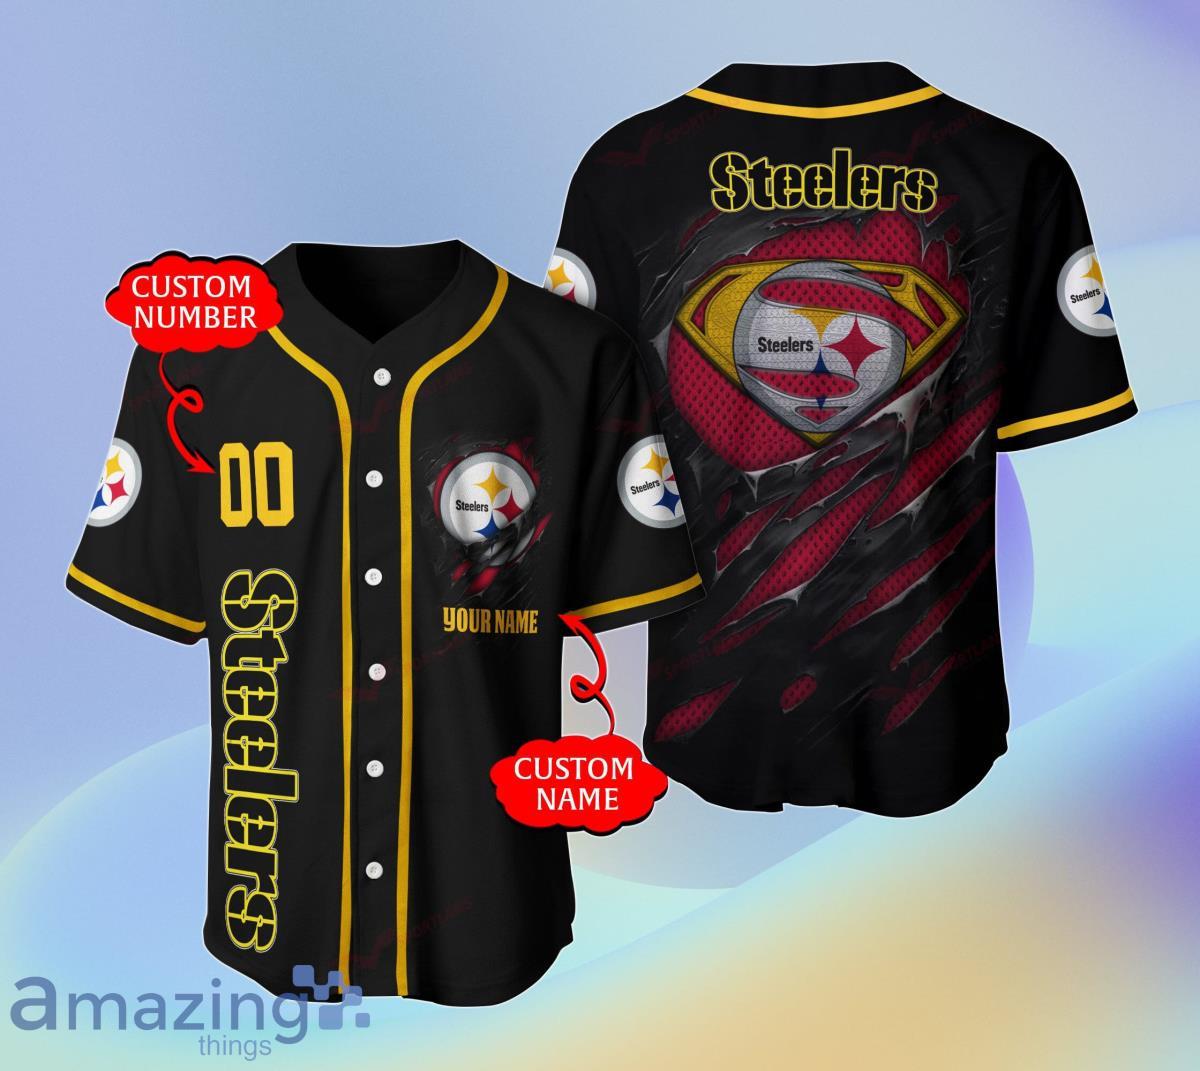 Custom Split Half Color Jersey Personalized Design Your Own Football Jerseys  for Men Women Youth 